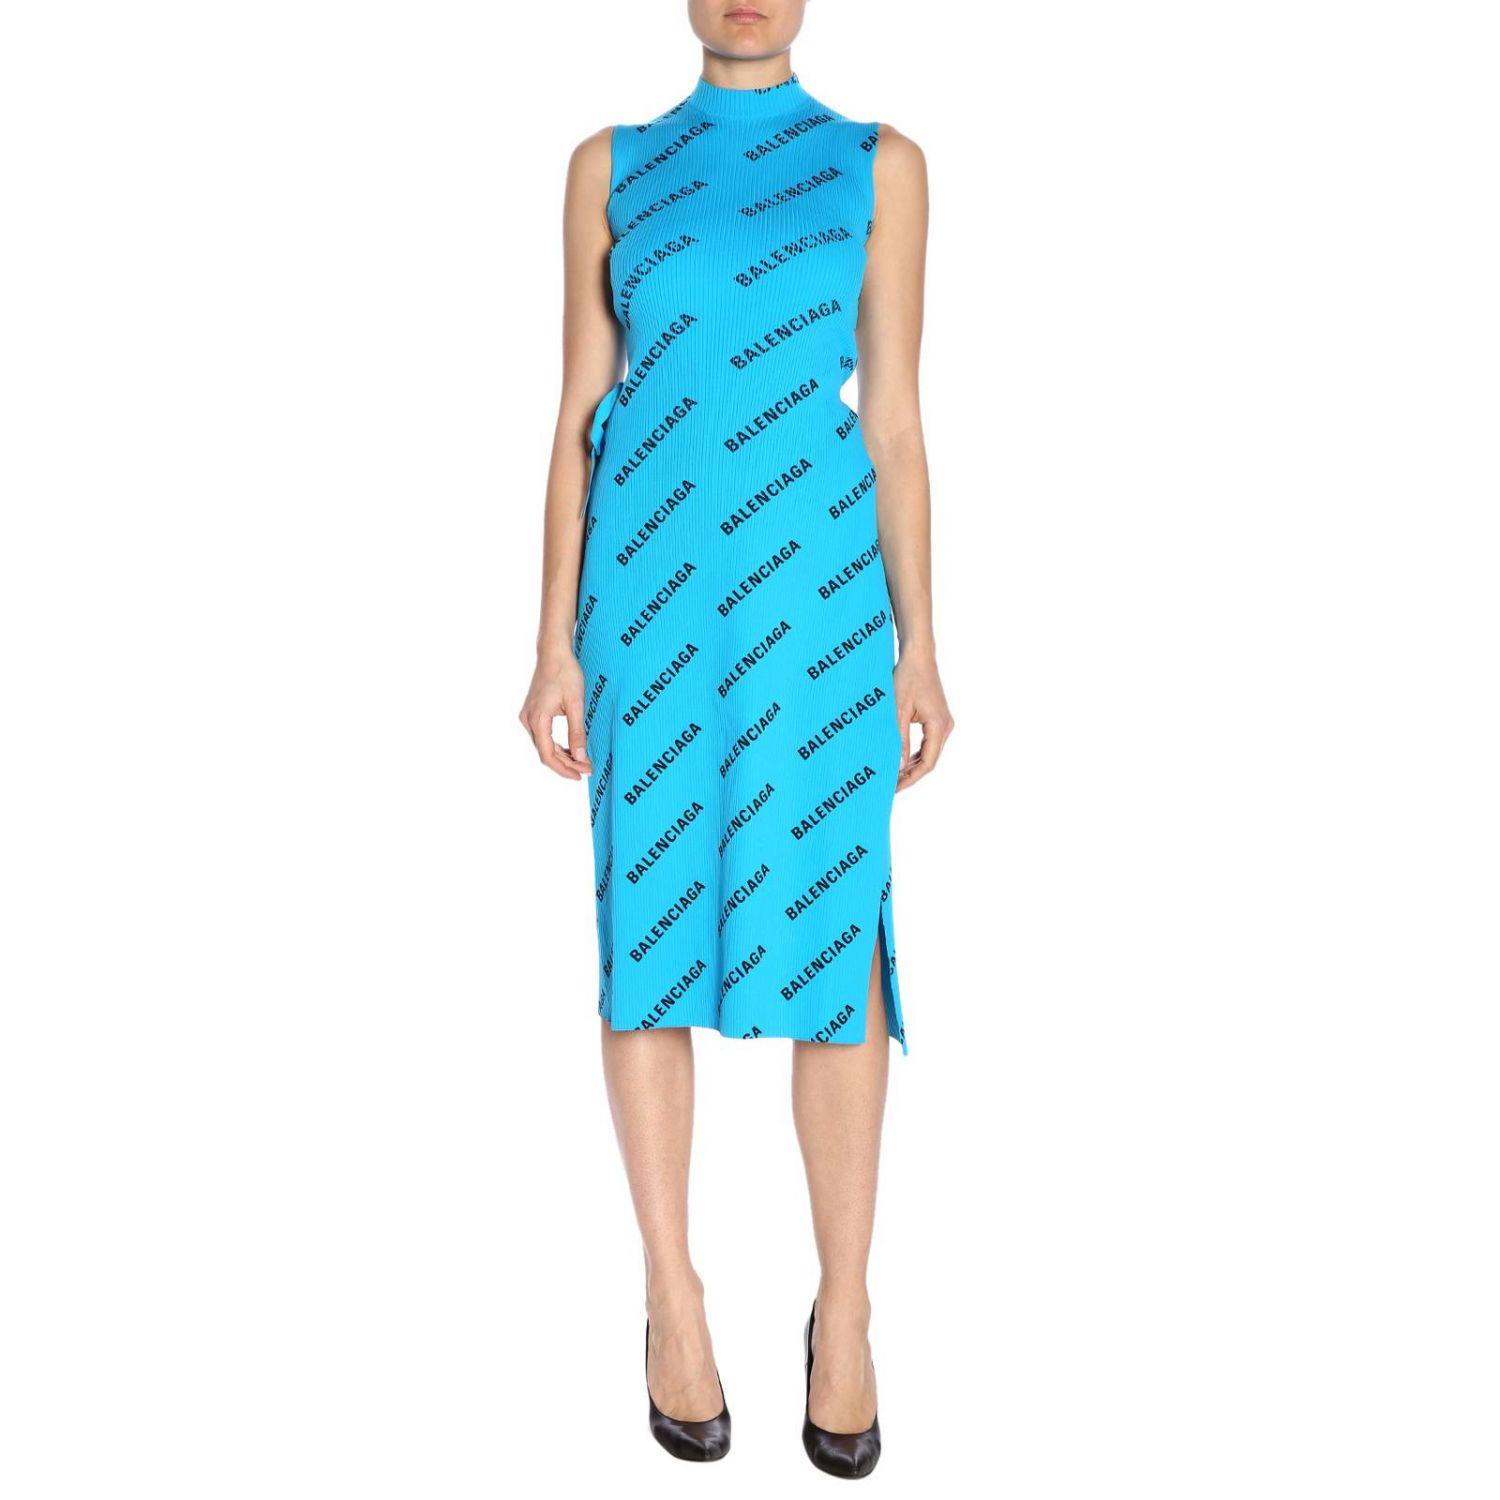 Balenciaga Synthetic Women's Dress in Turquoise (Blue) - Lyst